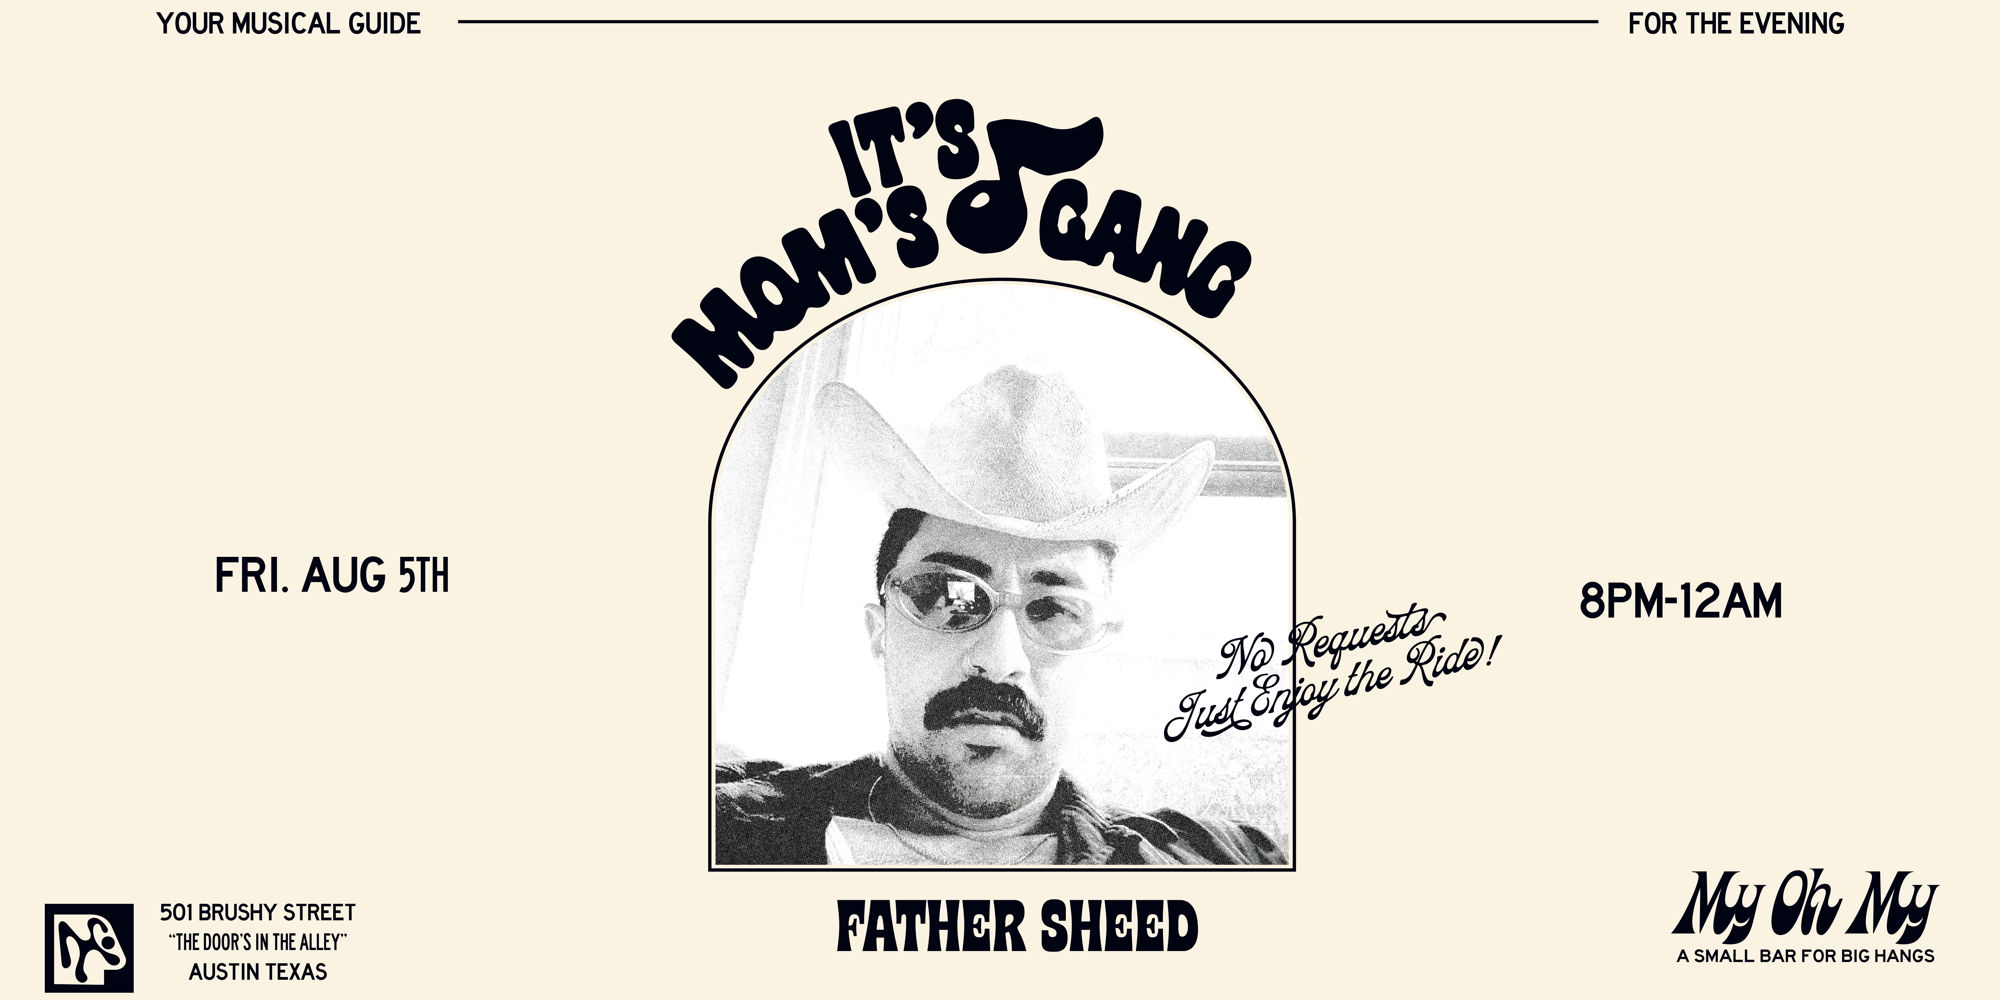 My Oh My Presents: Father Sheed @ My Oh My on 8/5 promotional image